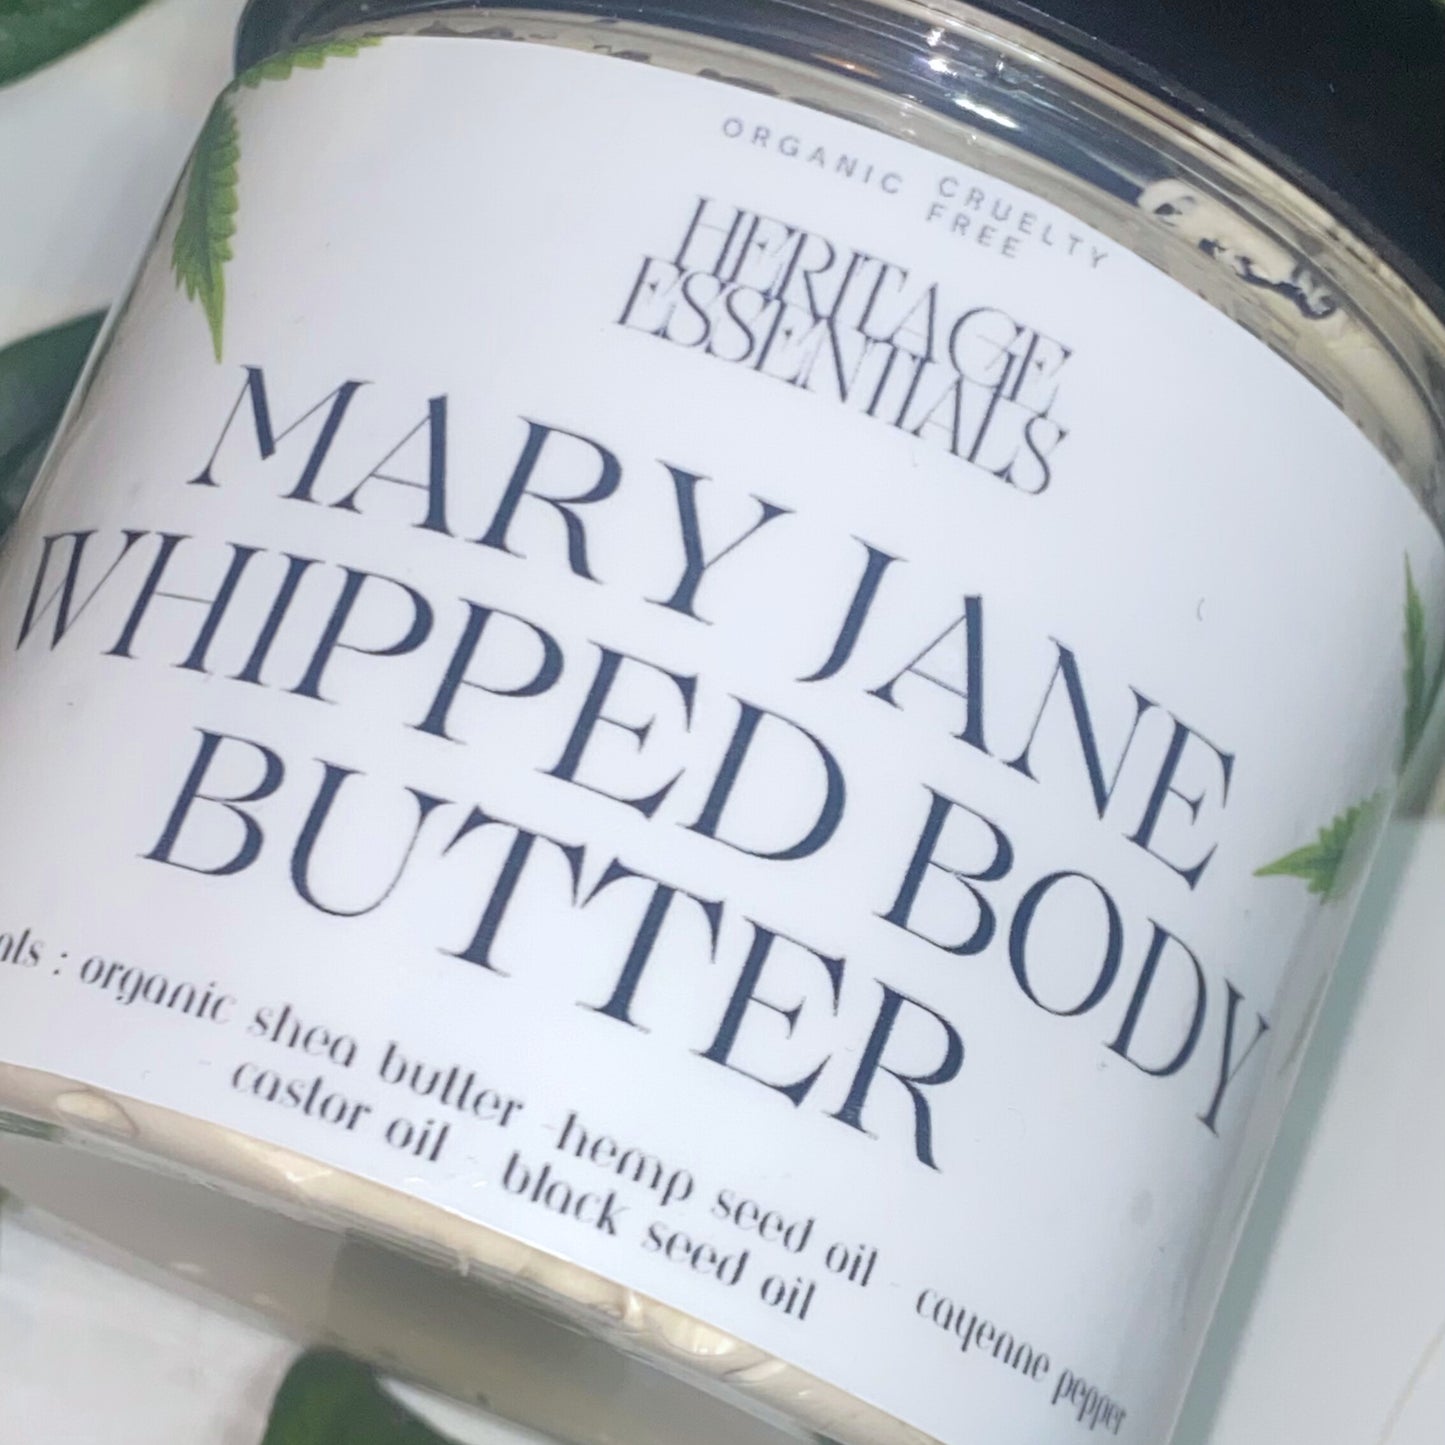 Mary Jane Whipped Body Butter